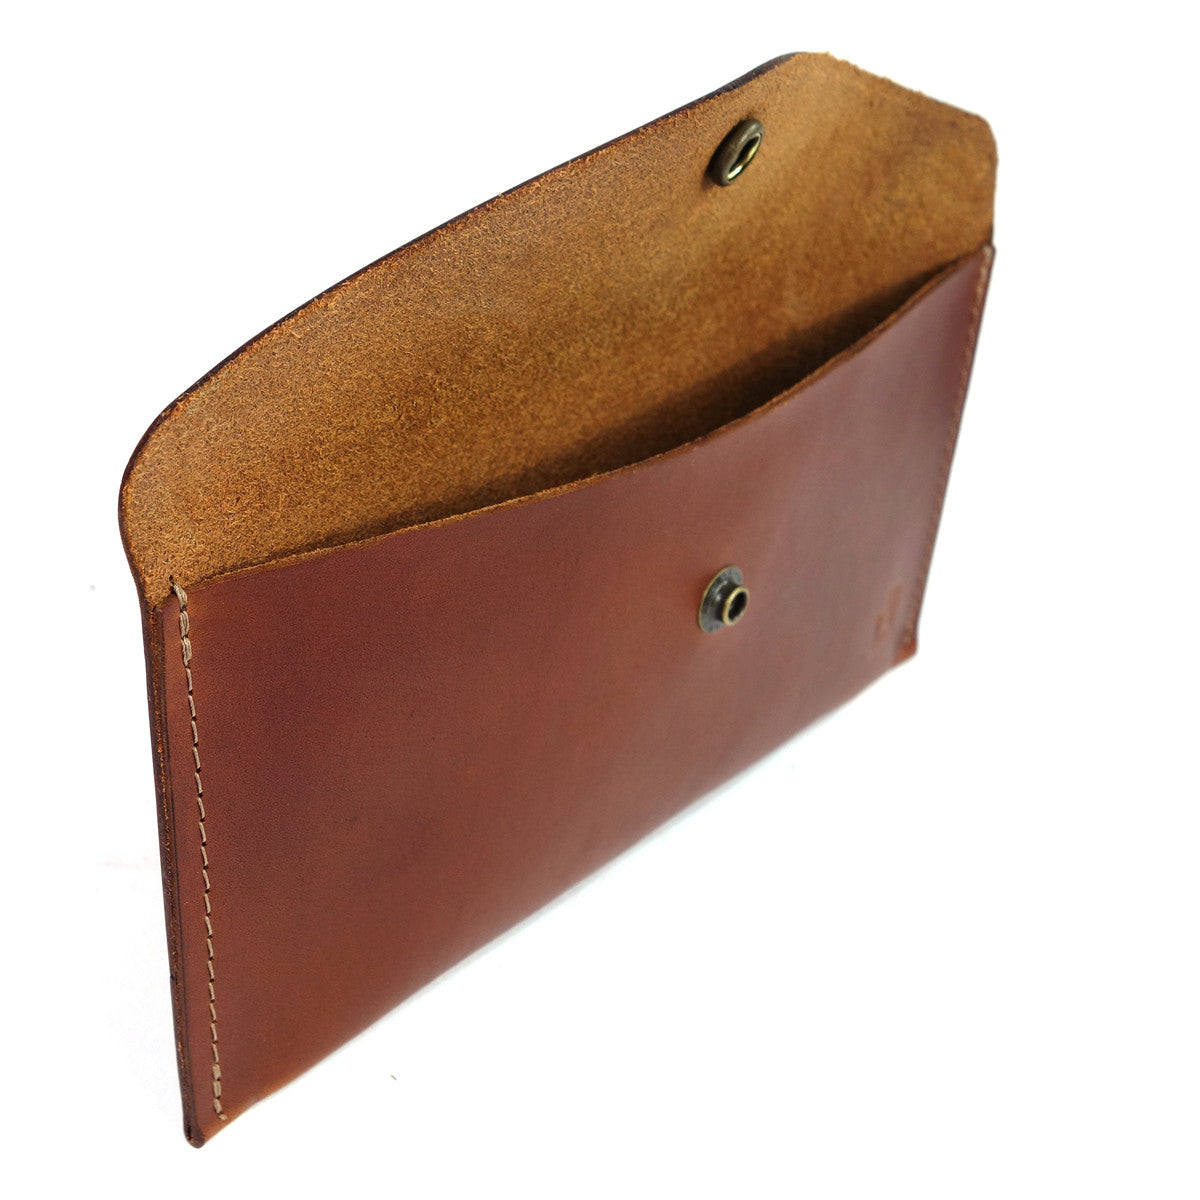 Field day case. This leather case will help you keep your belongings safe and organized. Carry pencils, small tools or anything else you will need on a day out on the town, going to class or just organizing the many things in your bag.  4/5oz Herman Oak Vegetable Tanned Leather, Antique Brass Snap. Pencil case. leather case.